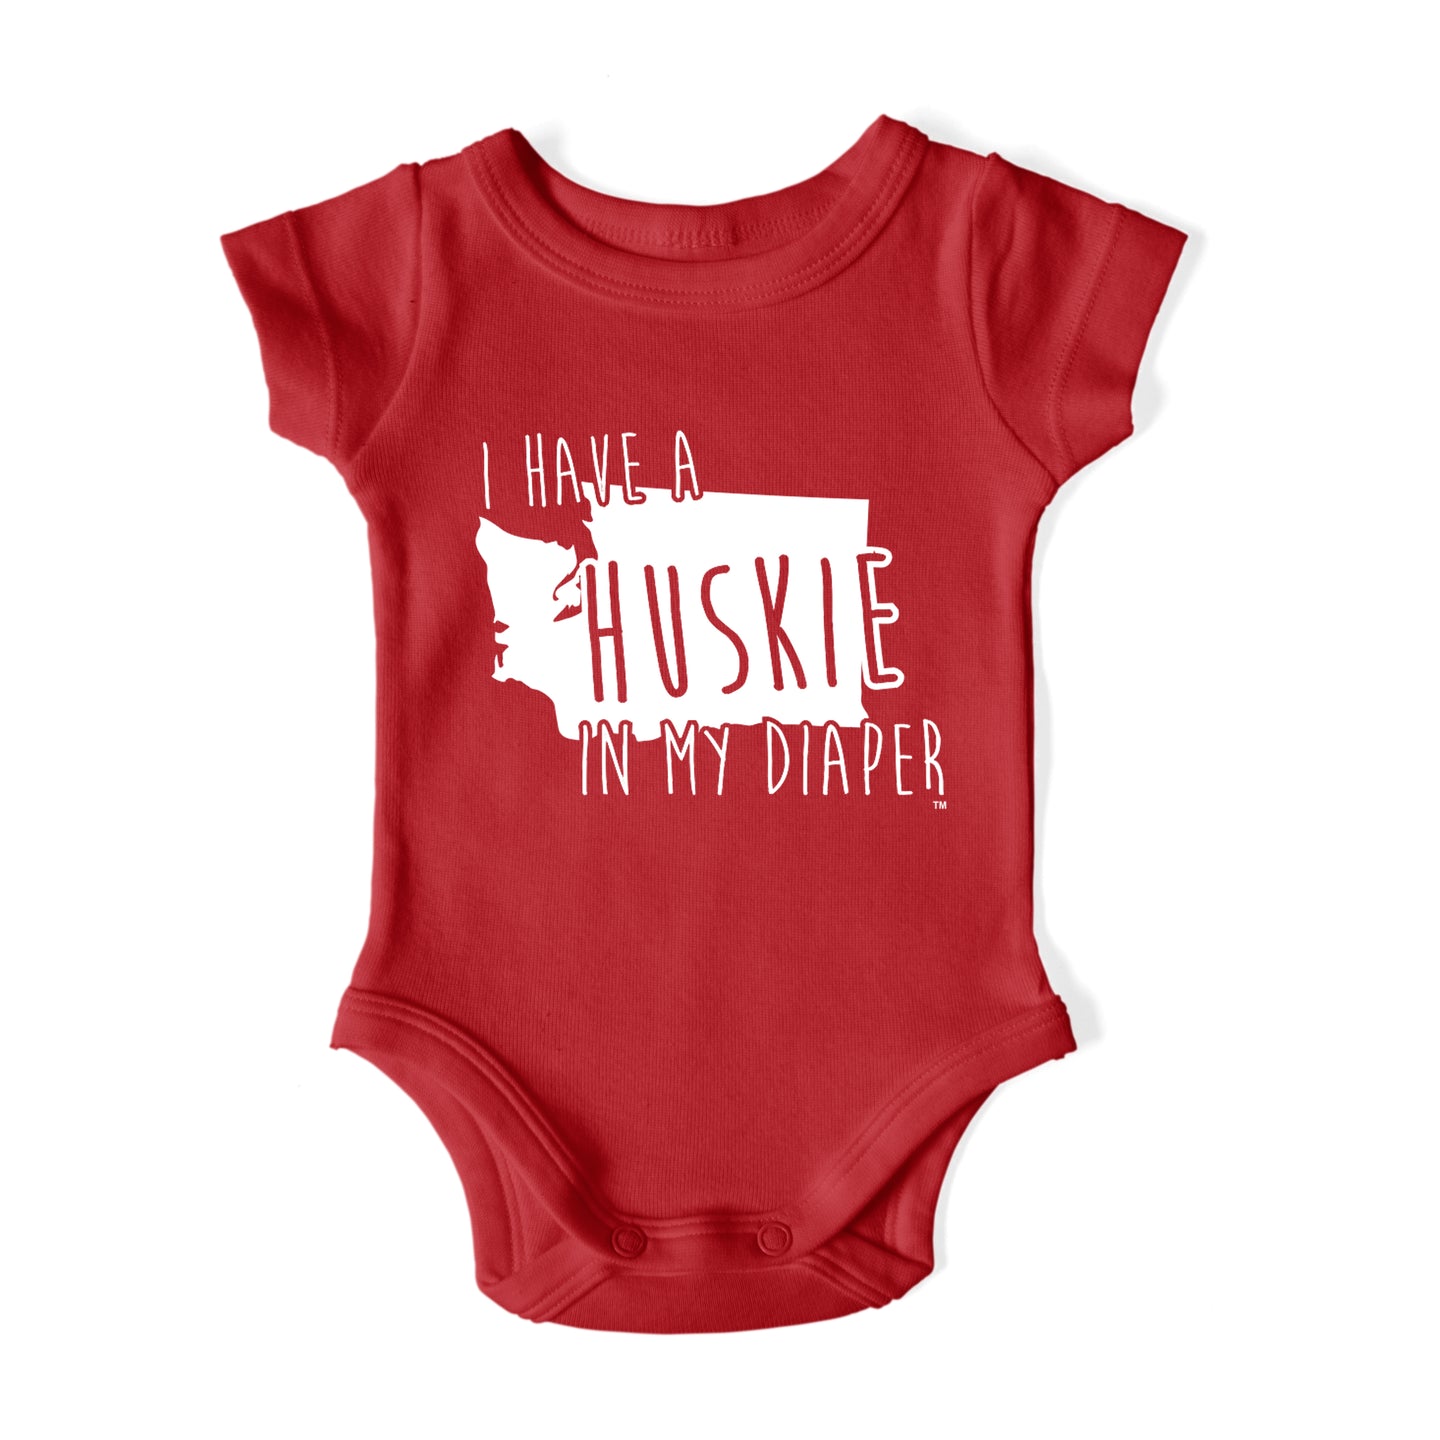 I HAVE A HUSKIE IN MY DIAPER Baby One Piece